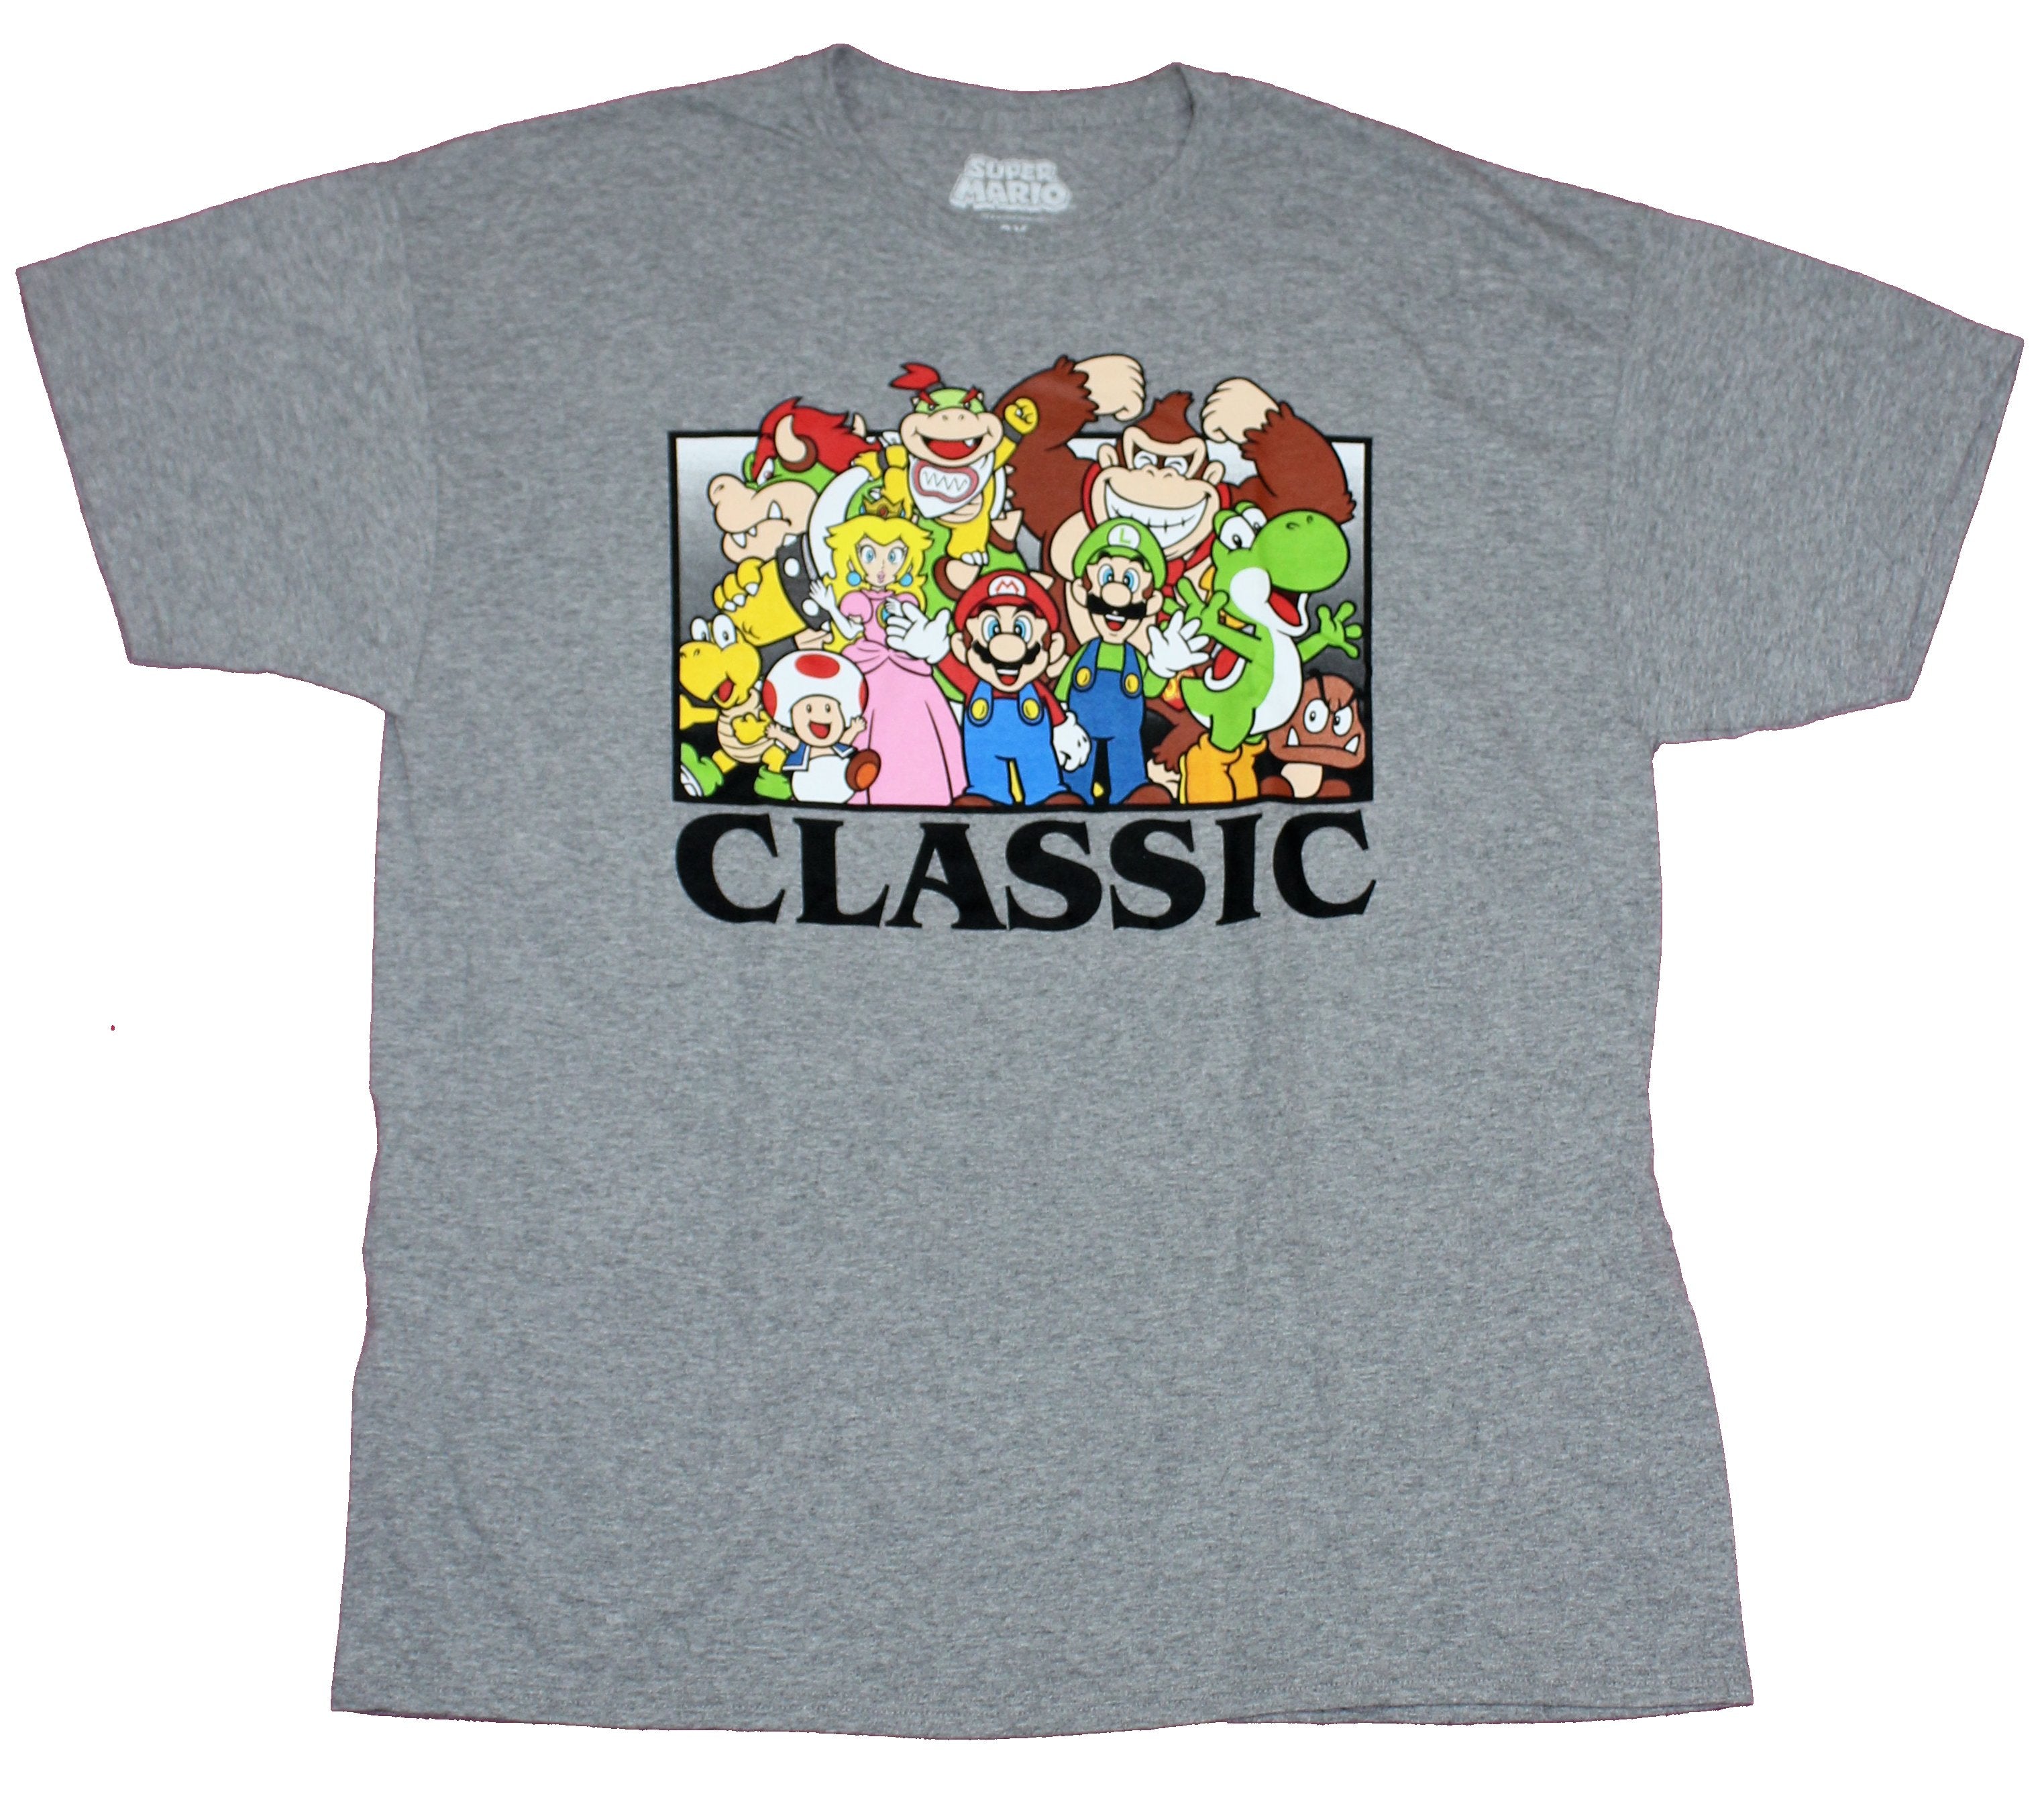 Super Mario Brothers Mens T-Shirt - Classic Logo Swamped By a Giant Sea Of  Characters